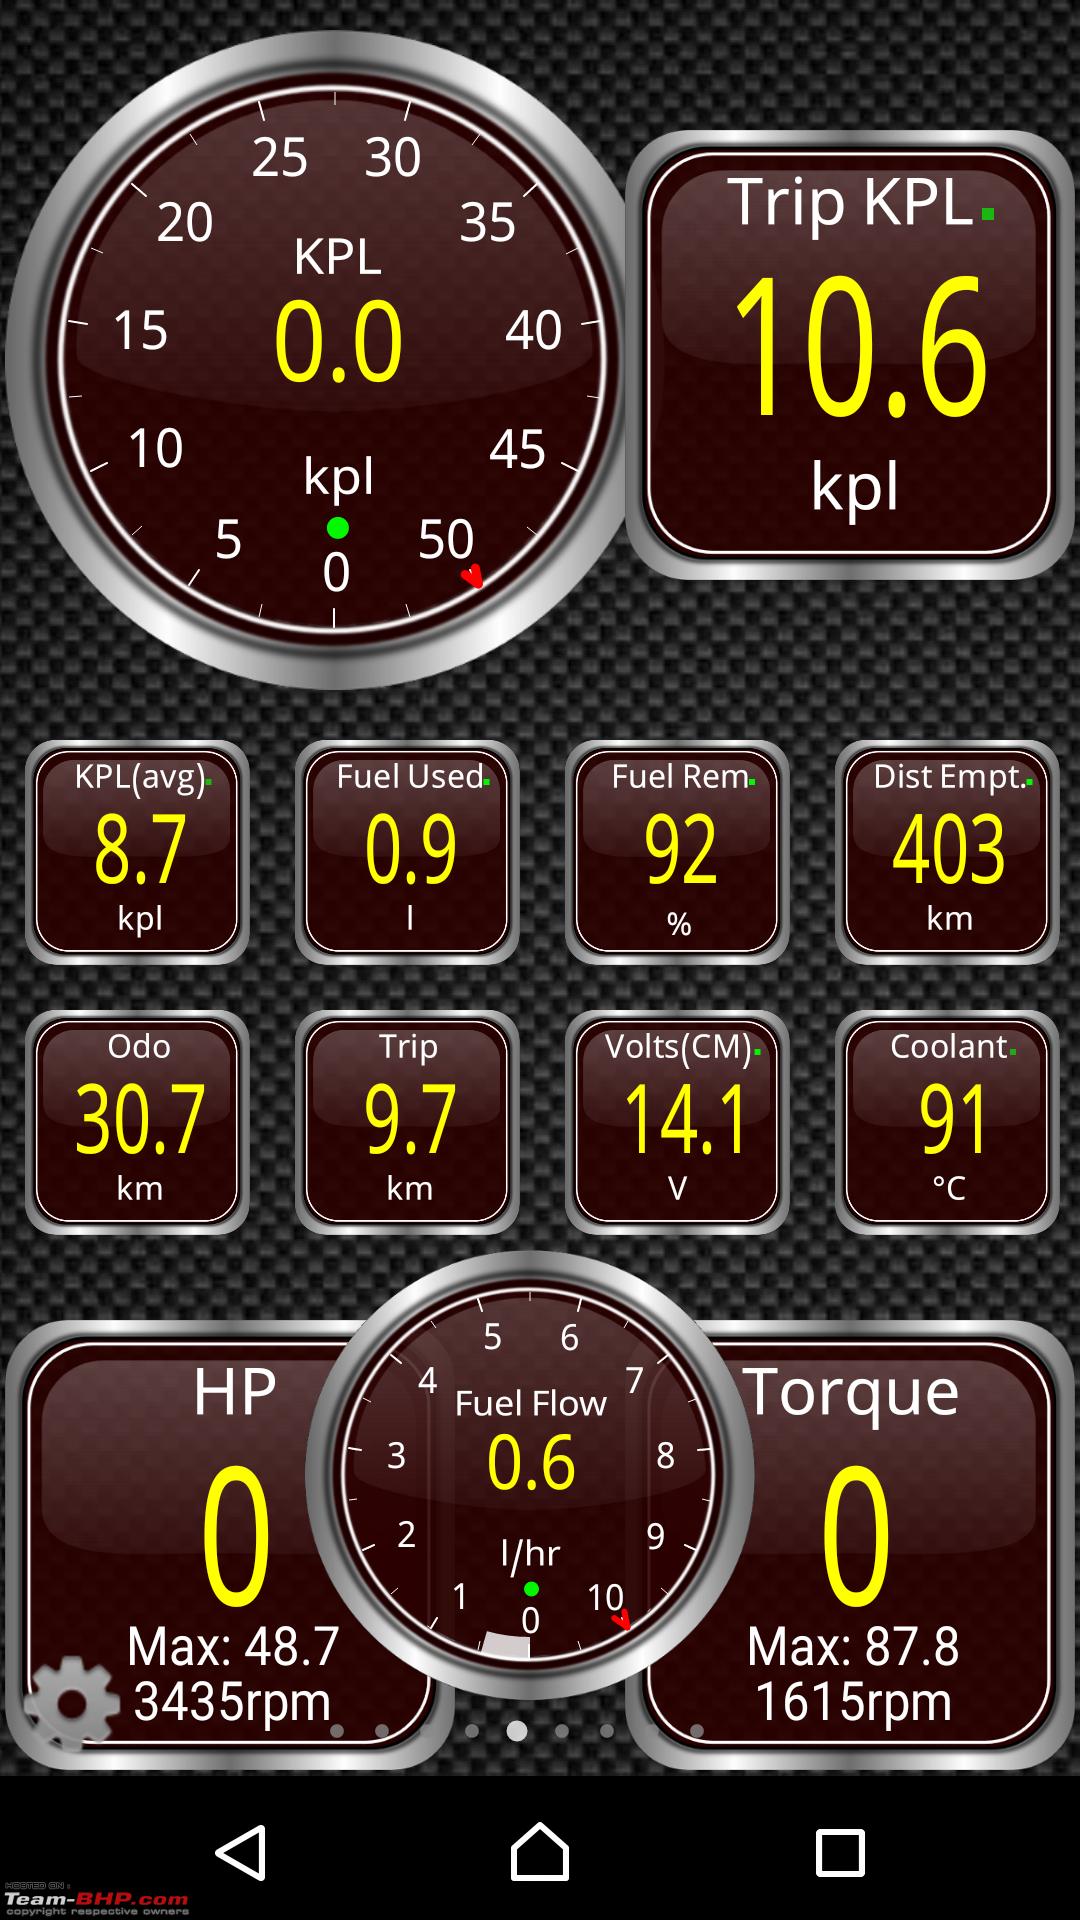 Review: My "Instrumentation" (Torque Pro/OBDII setup, TPMS etc.) and  related accessories - Team-BHP